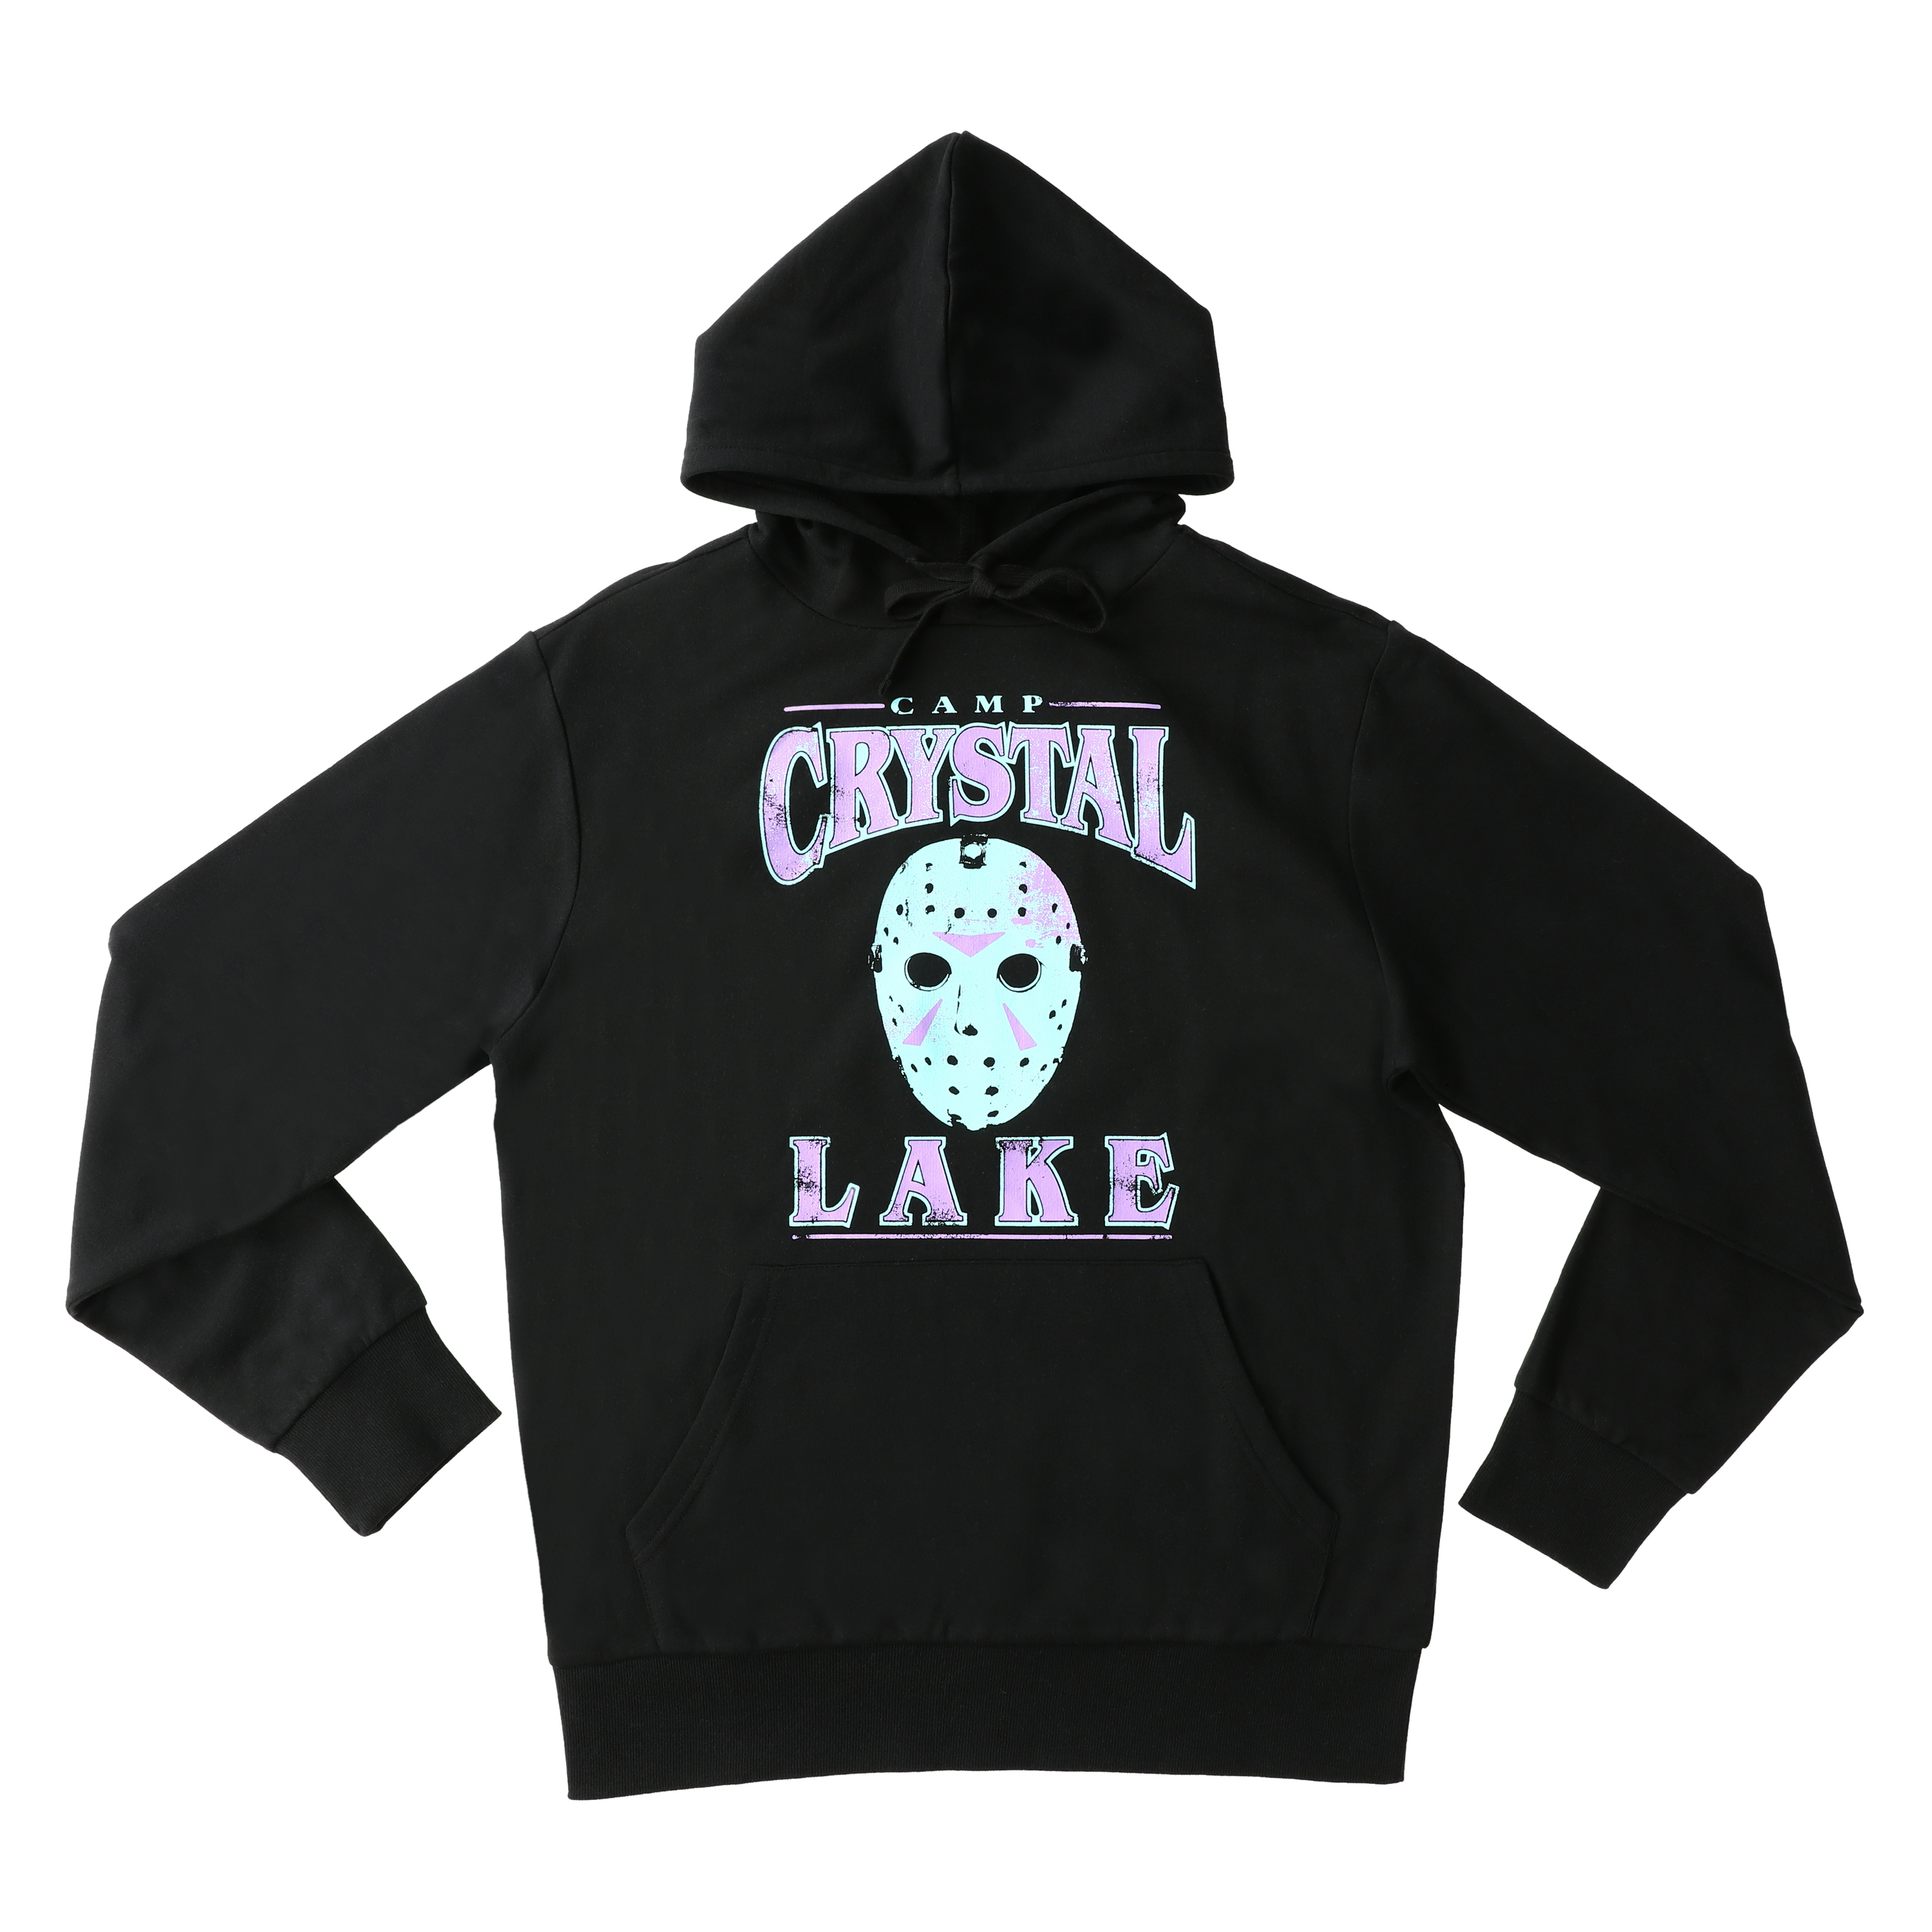 Friday The 13th™ Camp Crystal Lake Hoodie